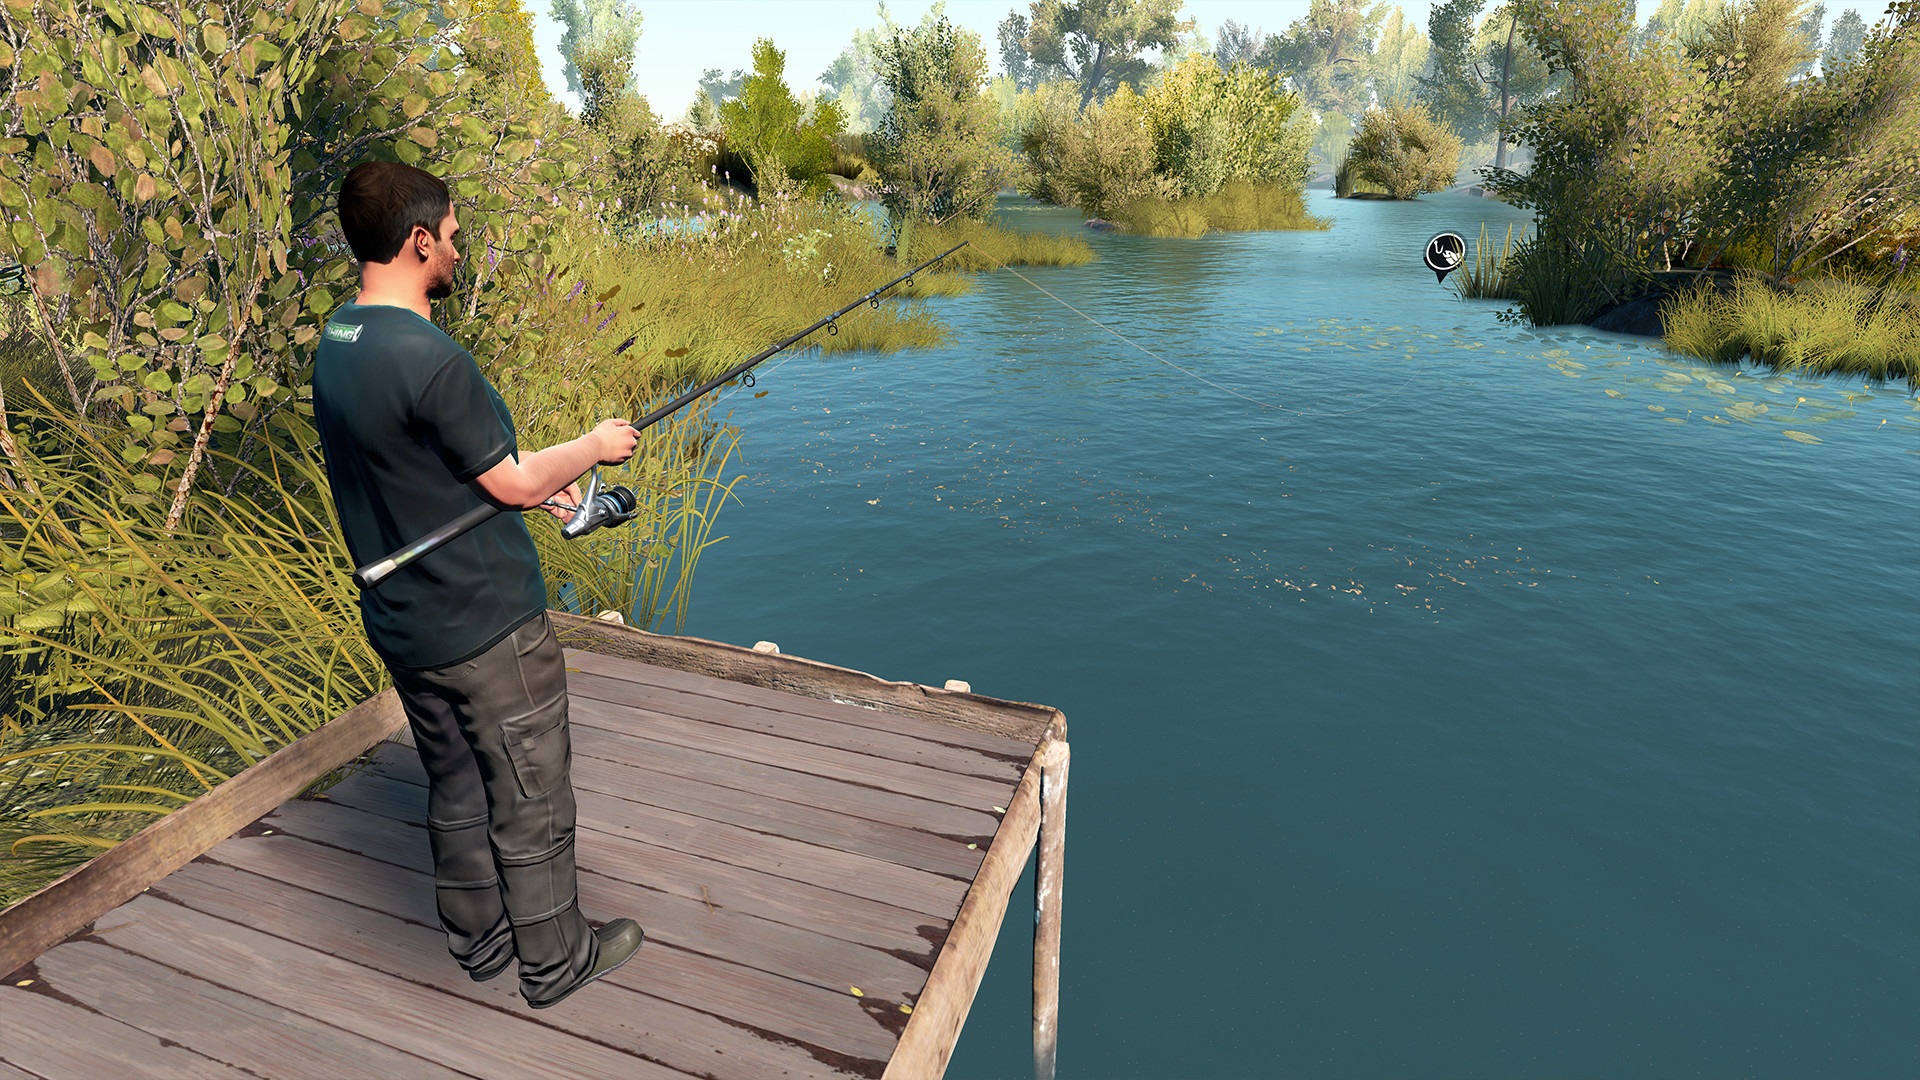 Dovetail Games Euro Fishing (Xbox ID) - Xbox One Gameplay/Review 